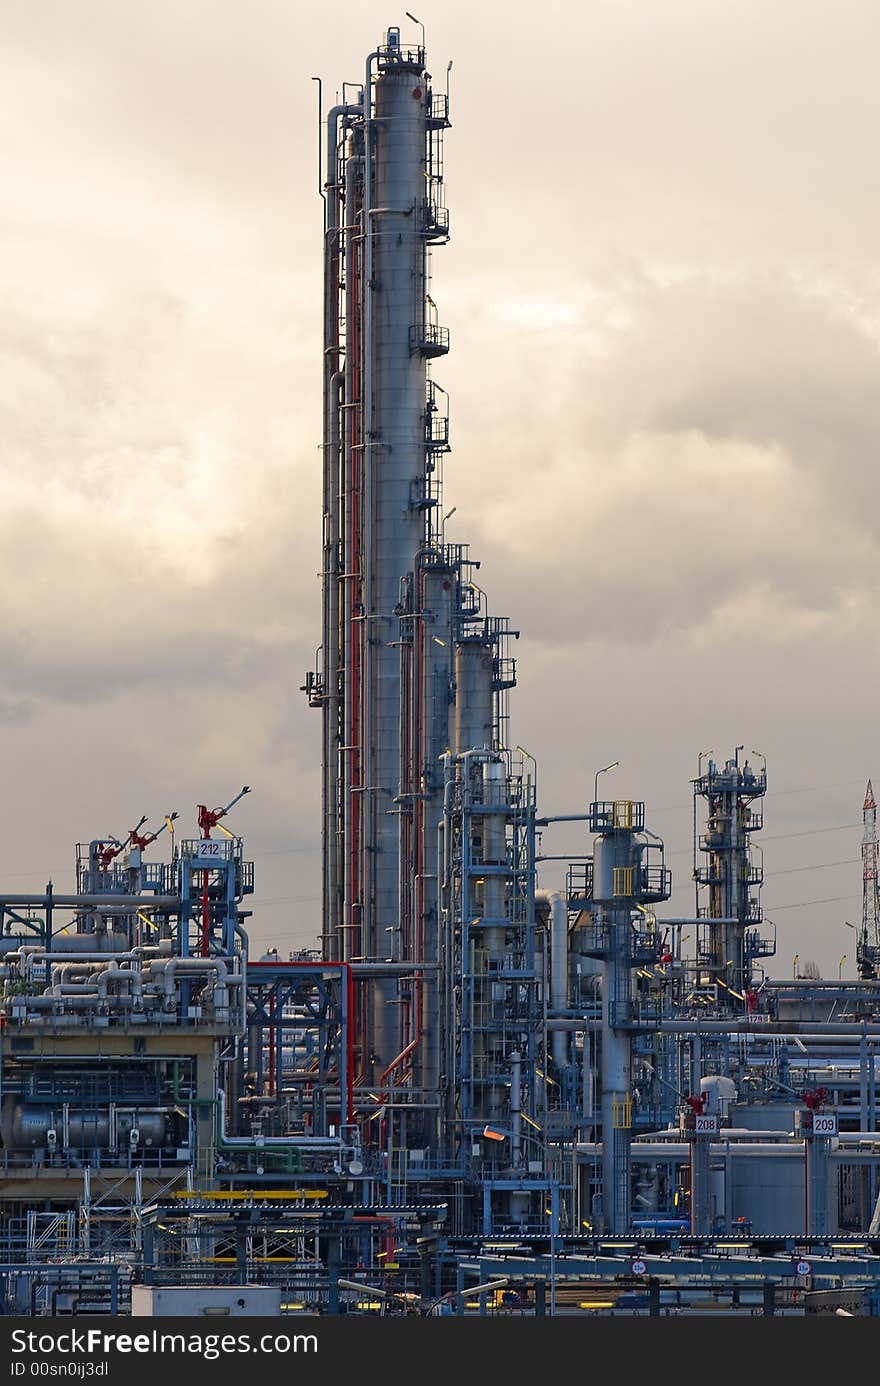 Refinery for the supply of energy also caused climate change